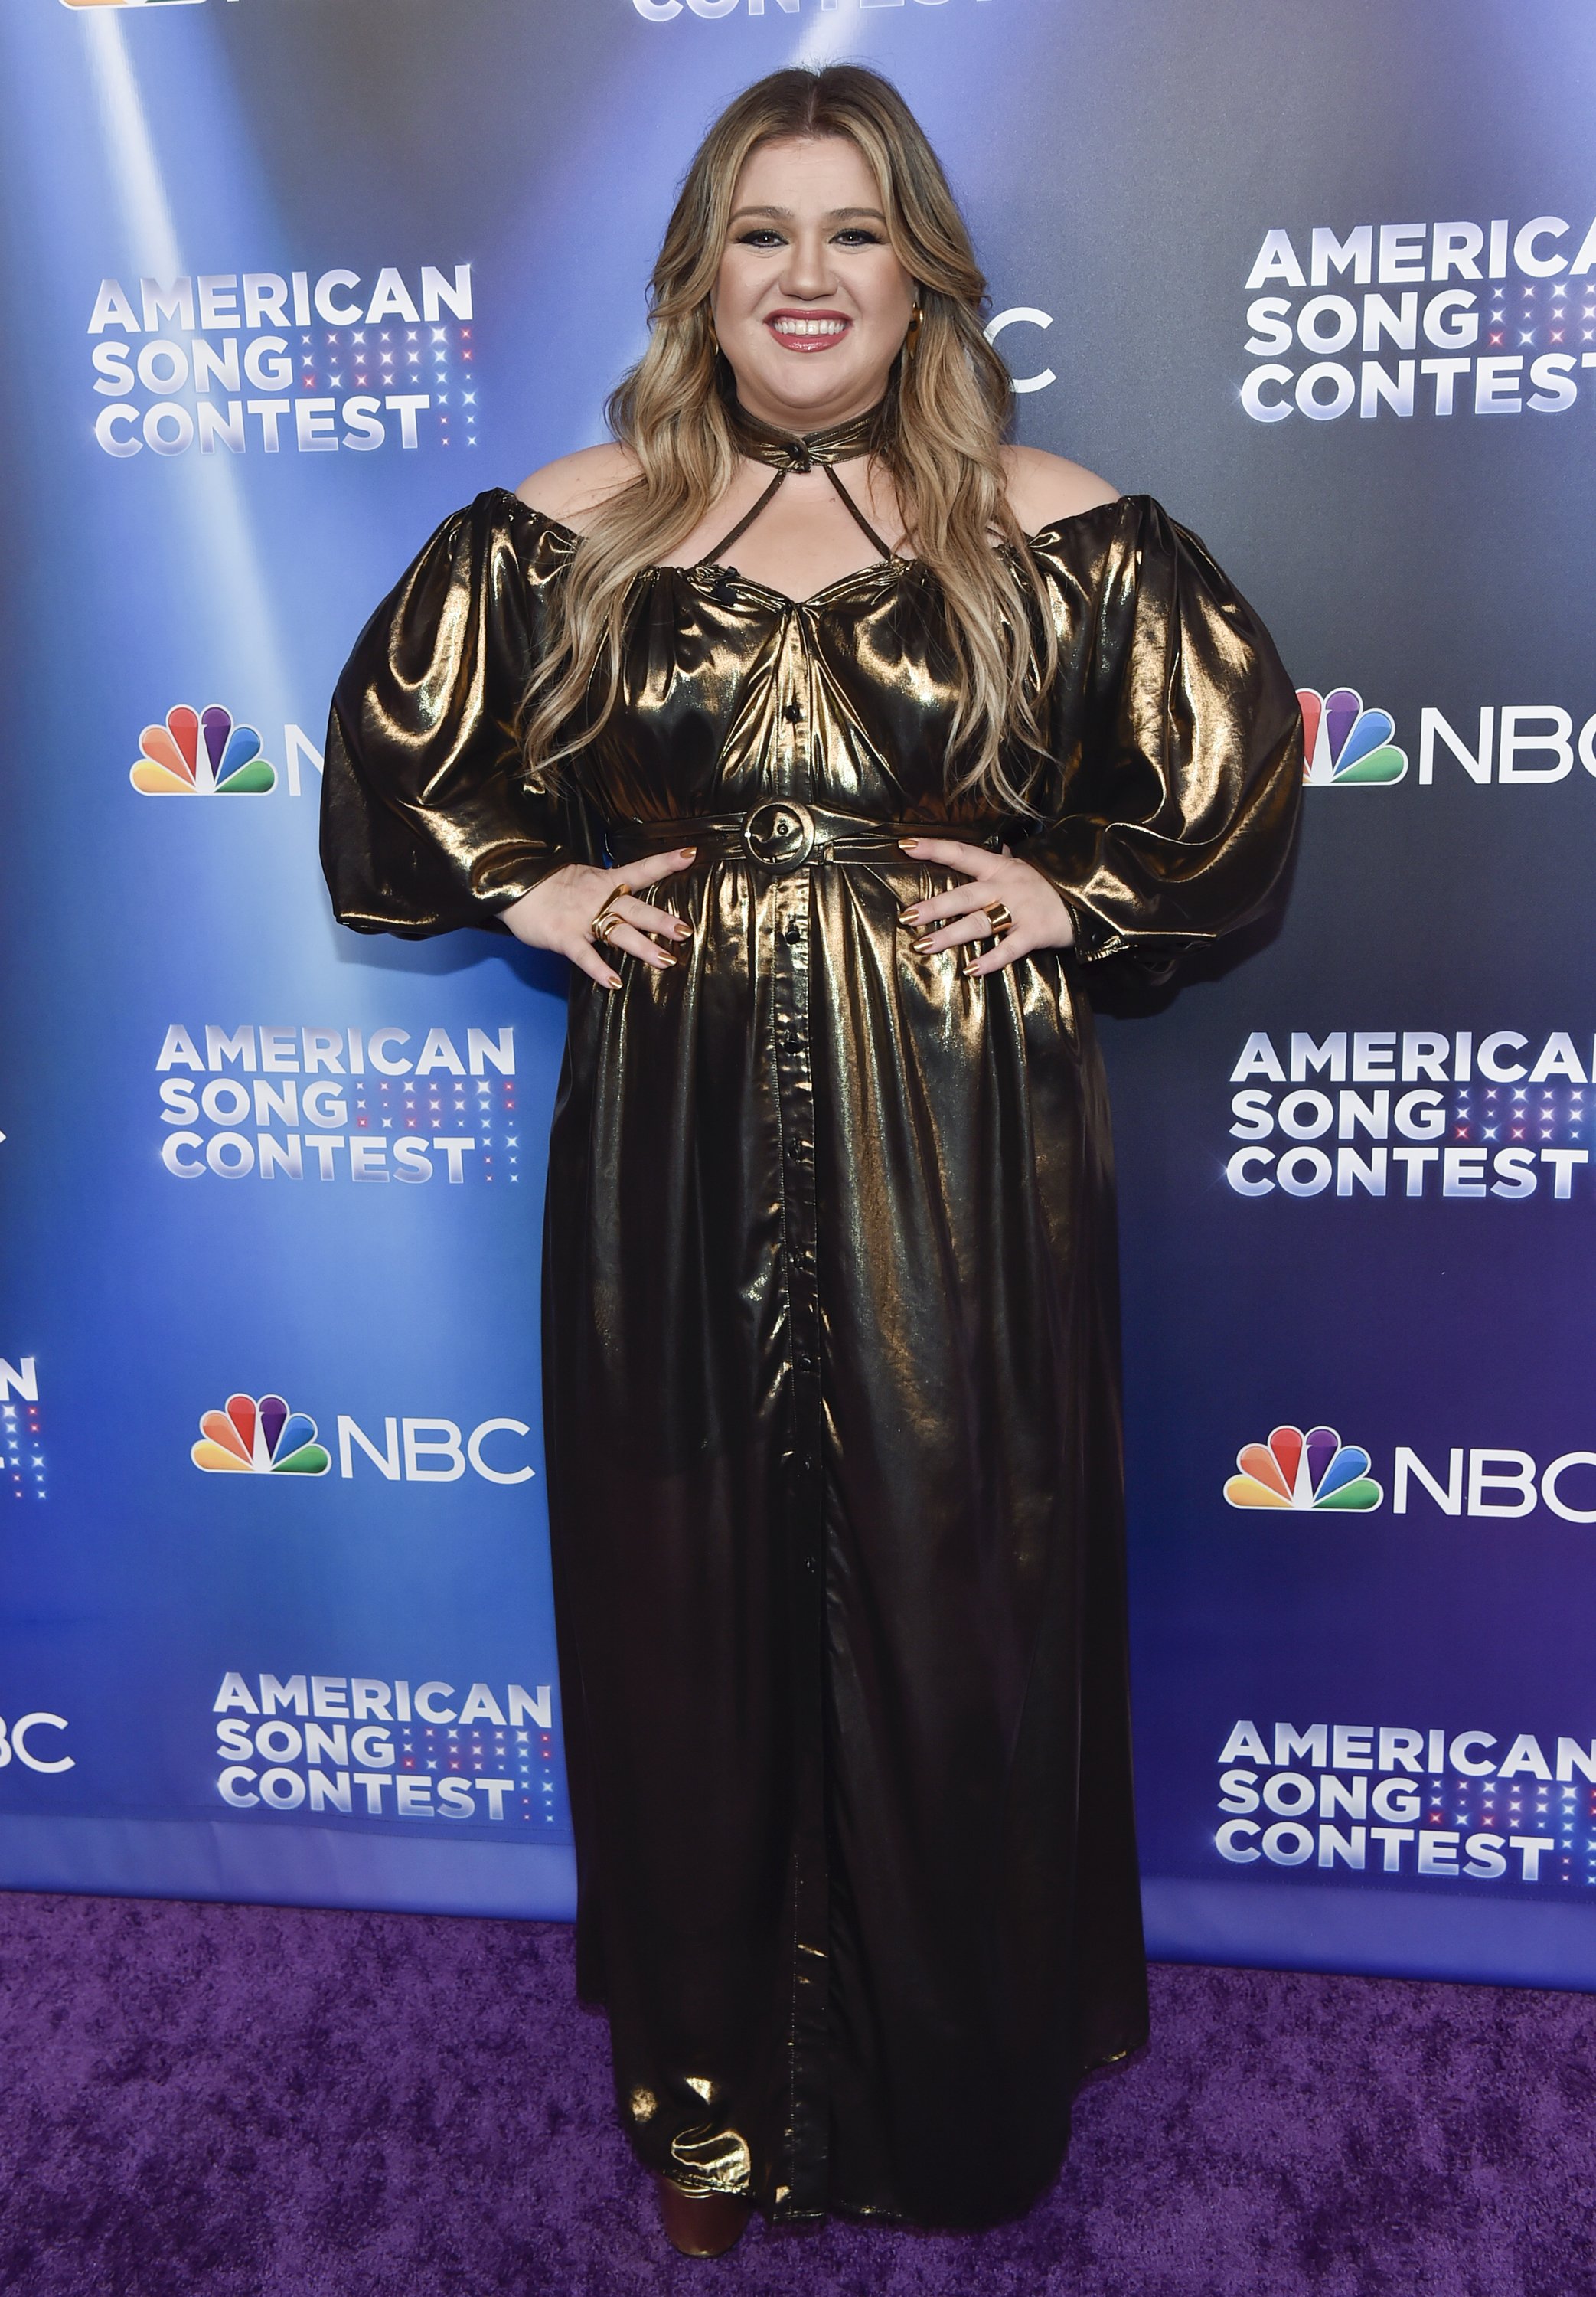   Kelly Clarkson attends NBC's "American Song Contest" Week 4 at Universal Studios Hollywood on April 11, 2022 in Universal City, California.  |  Source: Getty Images